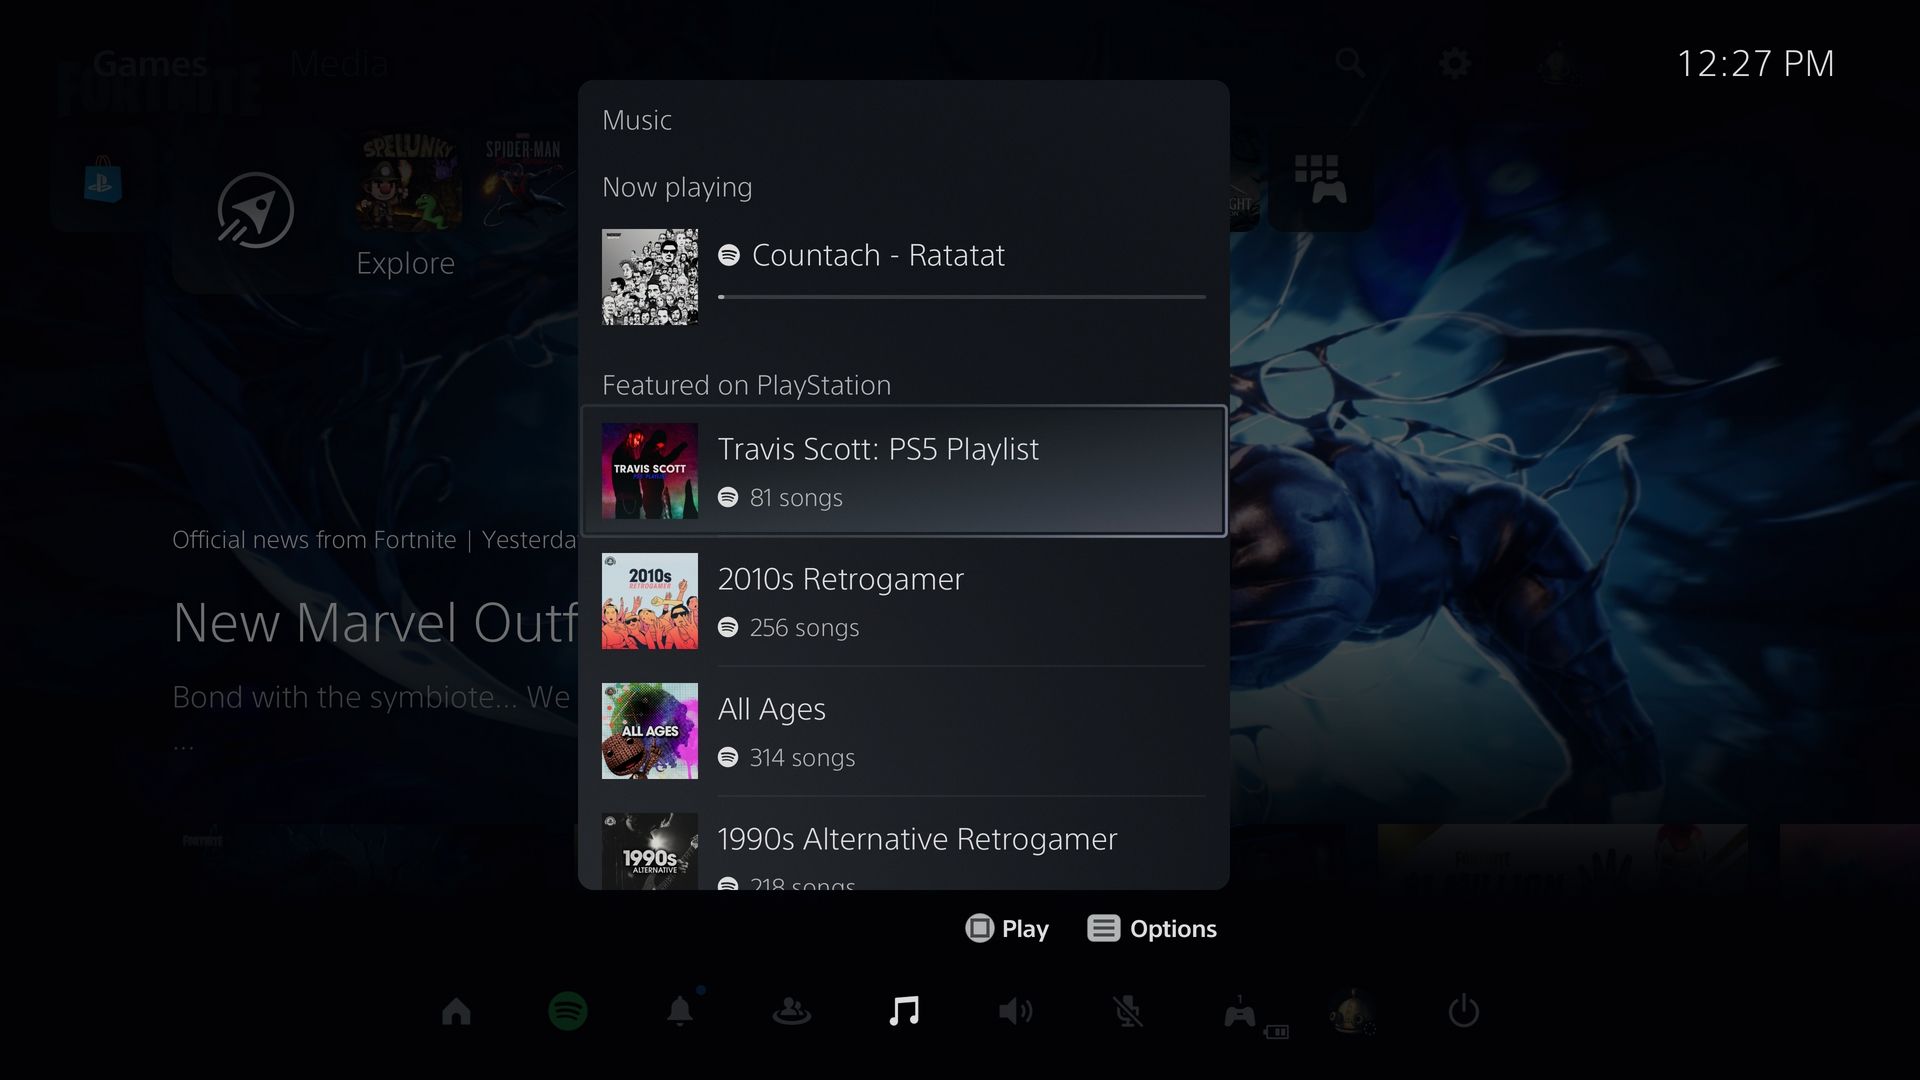 PS5] No option to listen to liked songs through P... - The Spotify Community